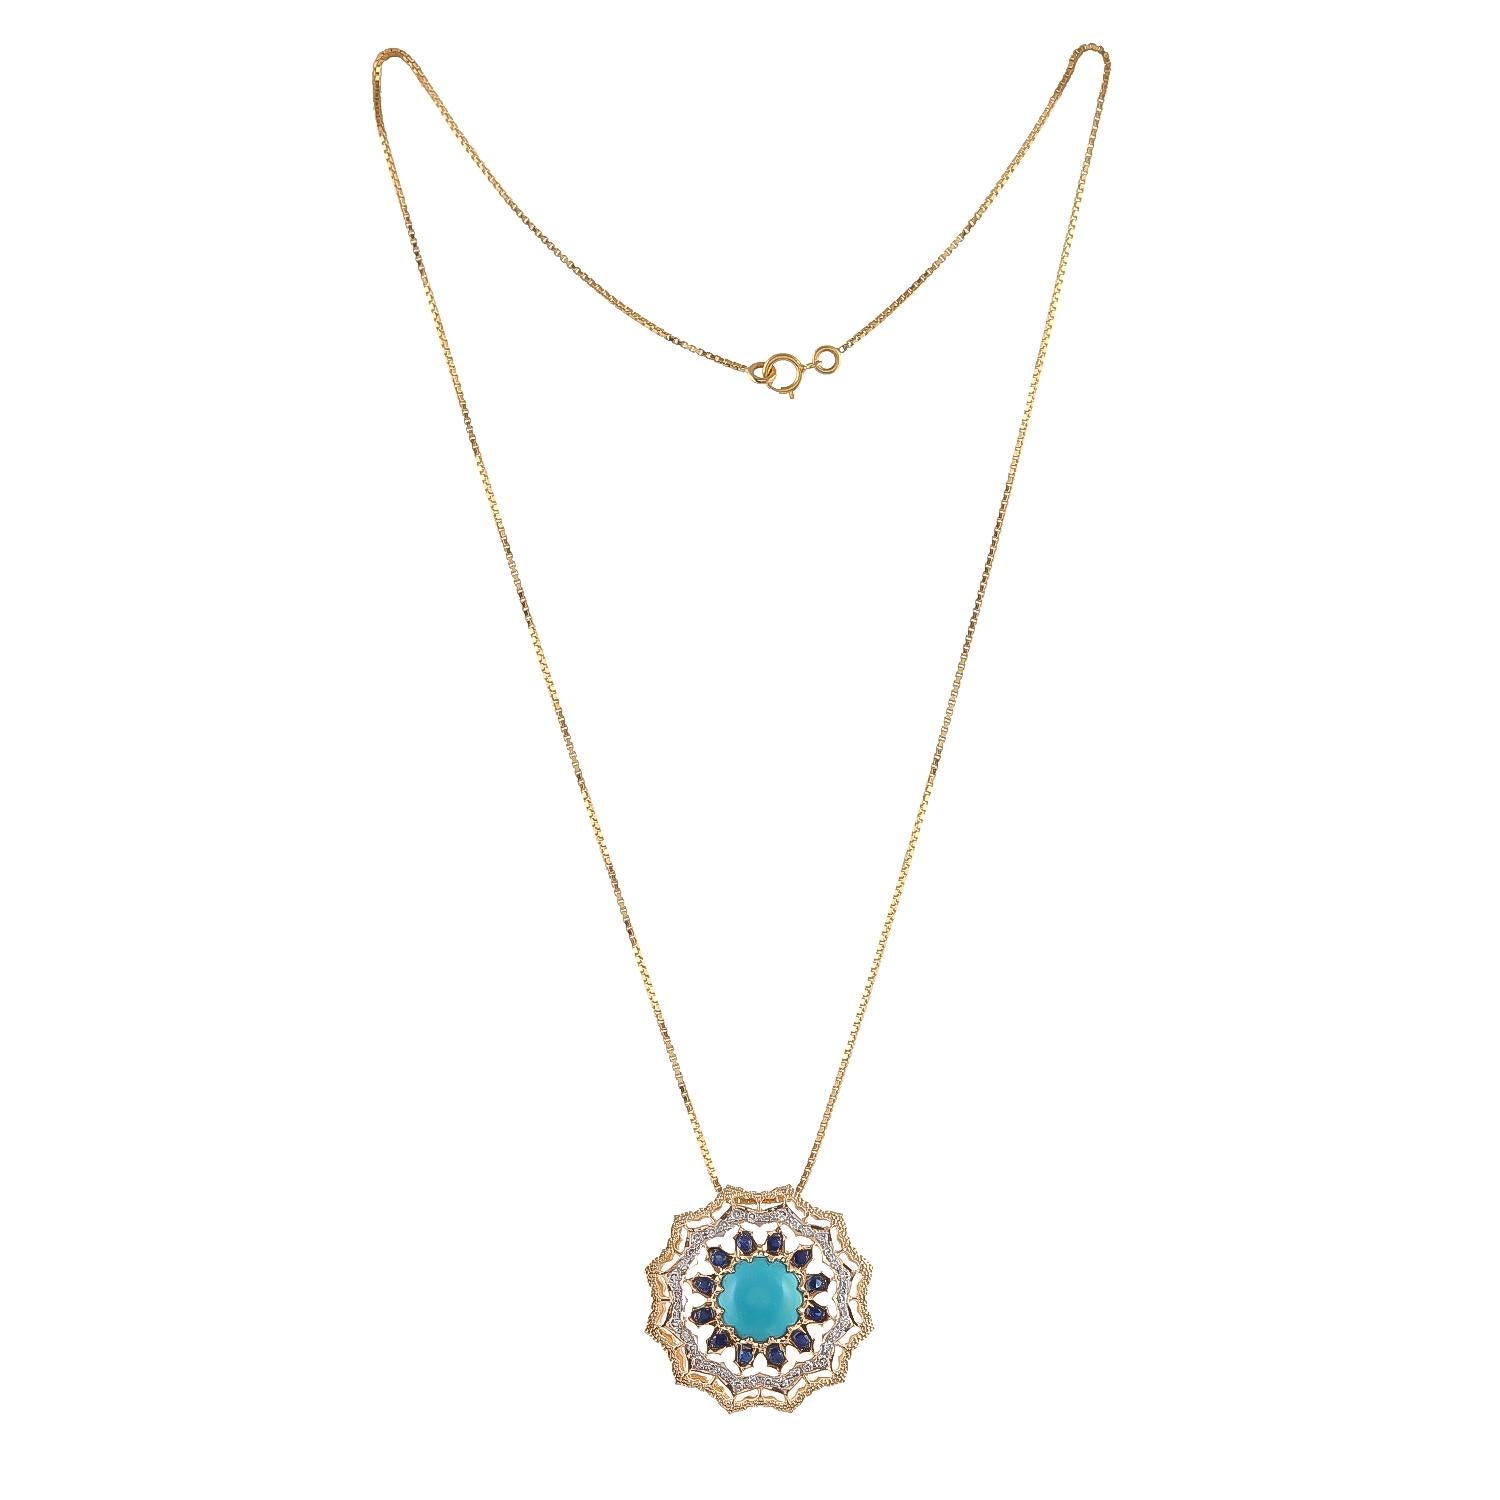 Designed as a flowerhead, set in the centre with 10mm round turquoise weighing approximately 2.61 carats framed by oval-shaped blue sapphires weighing approximately 0.36 carats, the border further decorated with 0.41 carats sparkling white diamonds